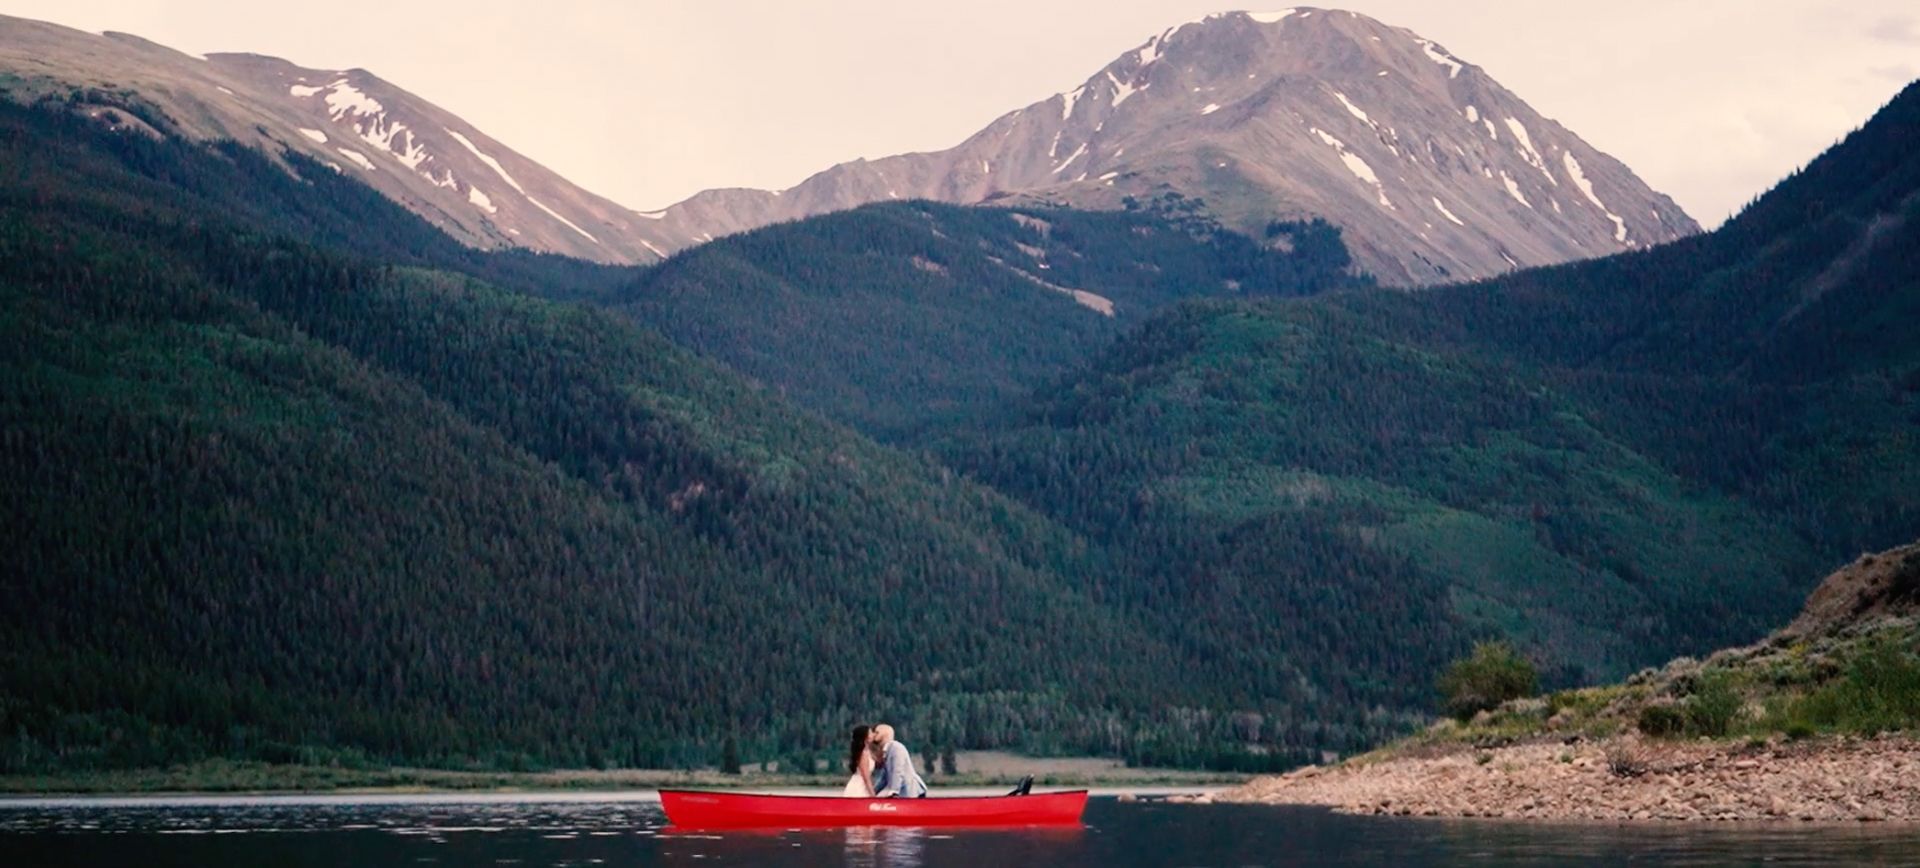 Eloping couple kissing in a red canoue in a lake